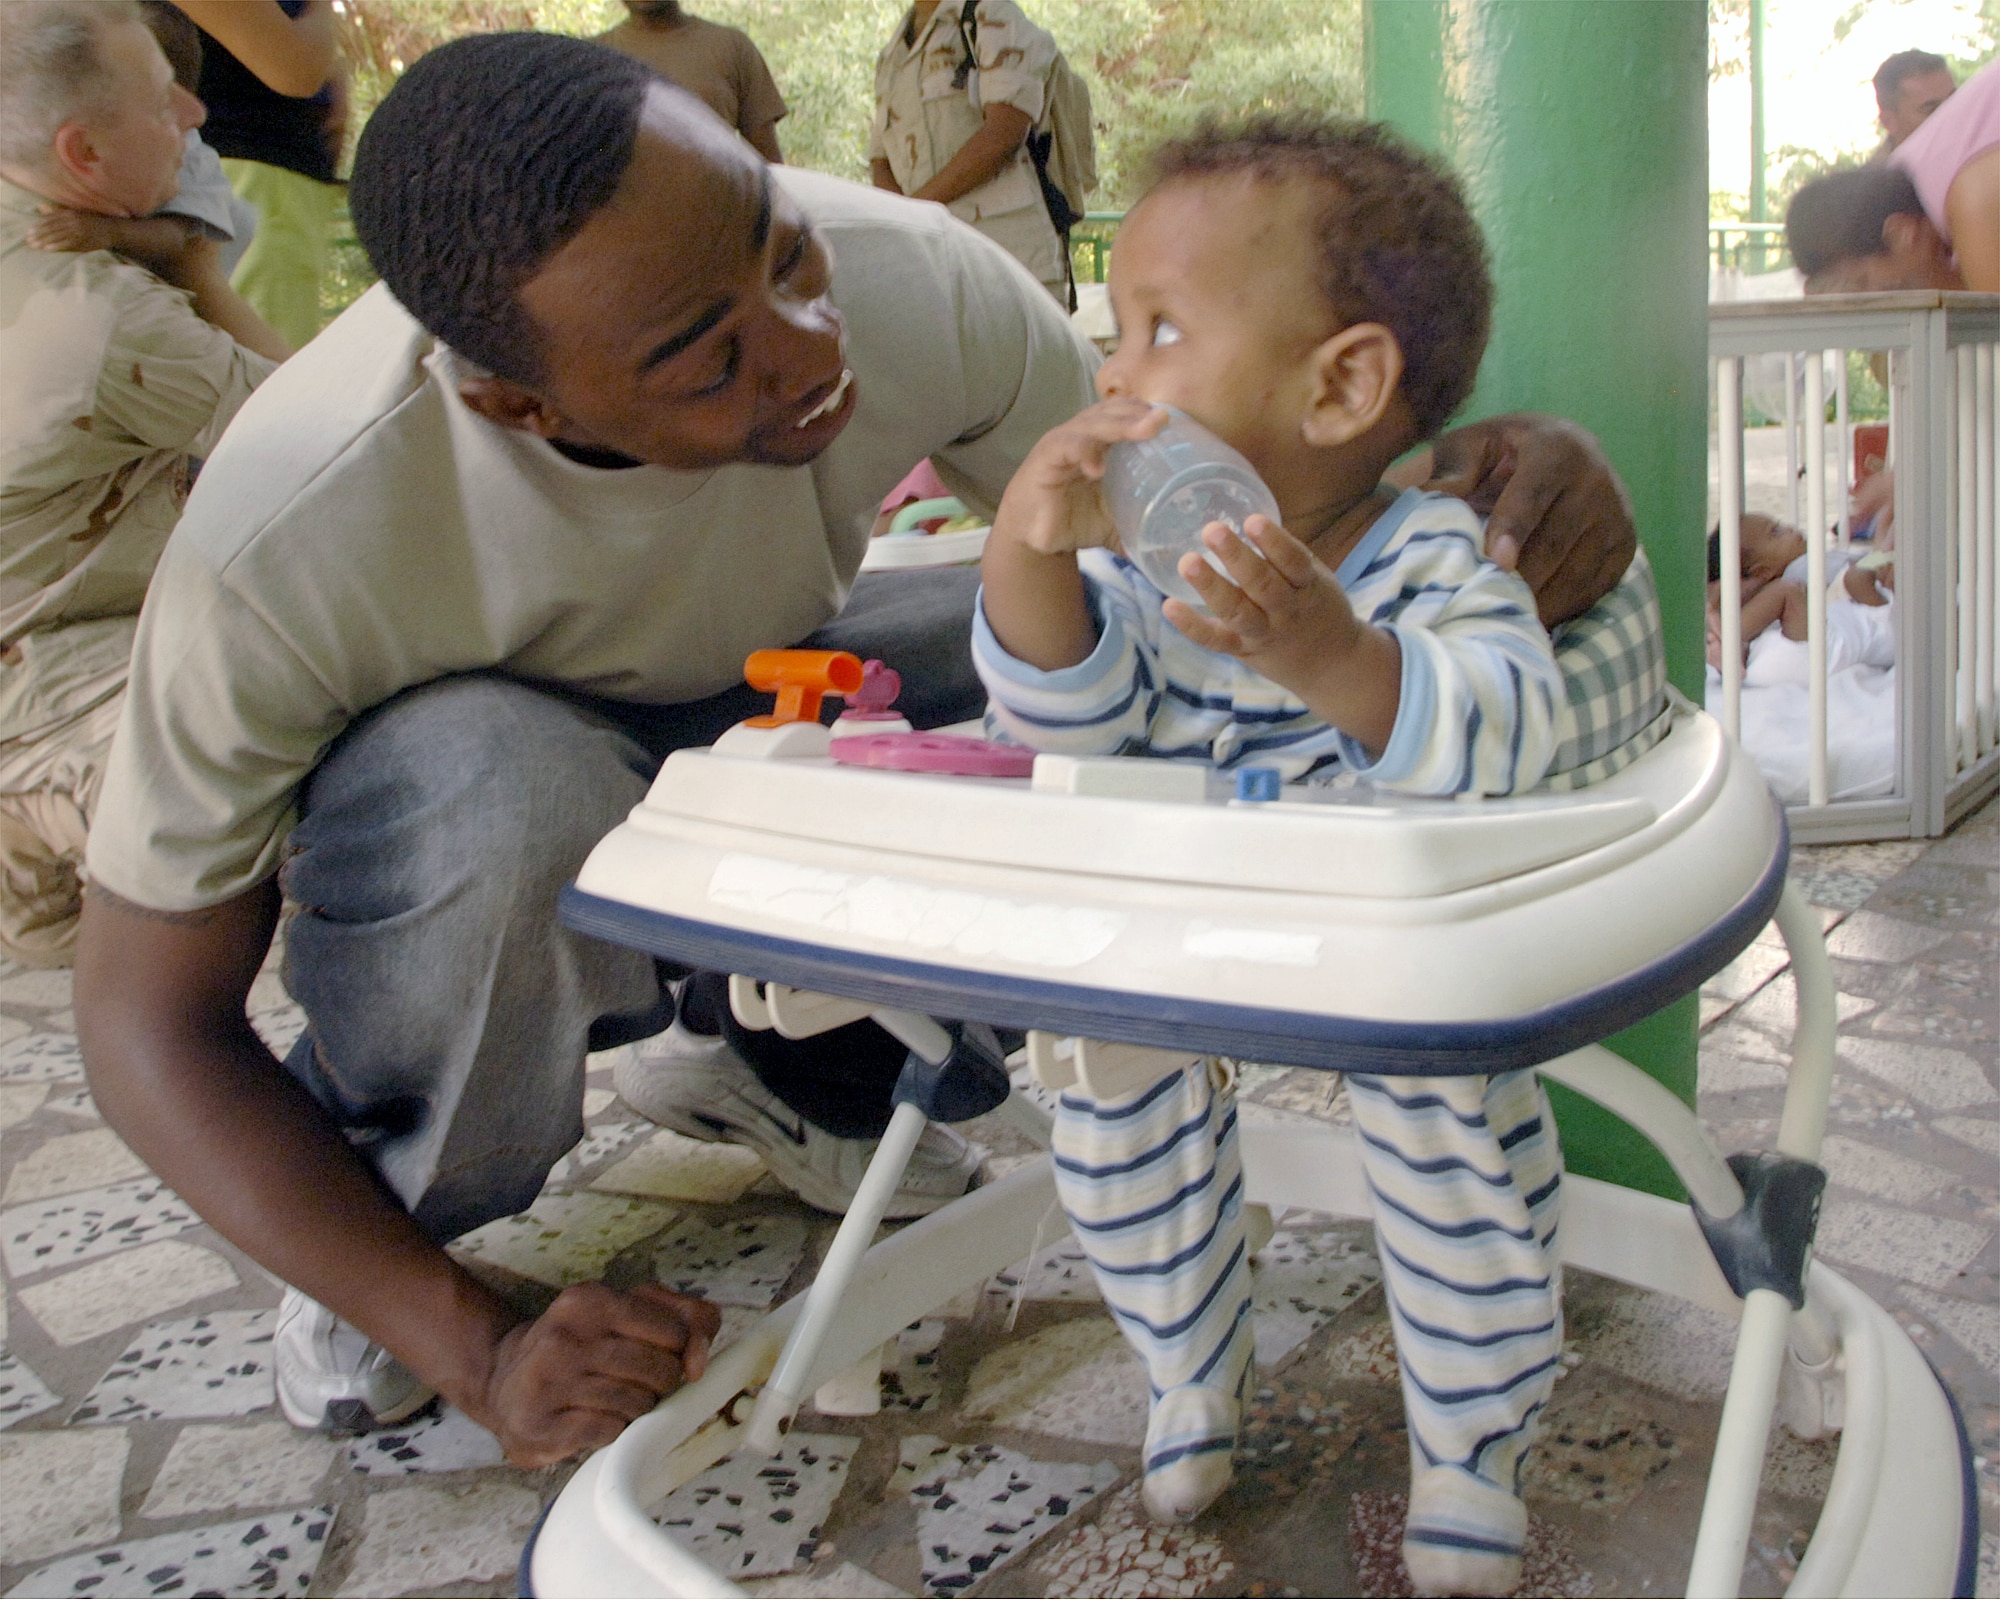 Staff Sgt. Adrian Mask plays with an orphaned toddler at the Franciscan Missionaries of Notre Dame Baby Orphanage in Djibouti City, Djibouti. Sergeant Mask is an air traffic control liaison for N-3 Navy Operations and is deployed to Camp Lemonier, Djibouti, from the 49th Operations Support Squadron at Holloman Air Force Base, N.M. Sergeant Mask volunteers as often as his schedule allows to help feed and play with 40 orphaned children. (U.S. Air Force photo/Staff Sgt. Francesca Popp) 
